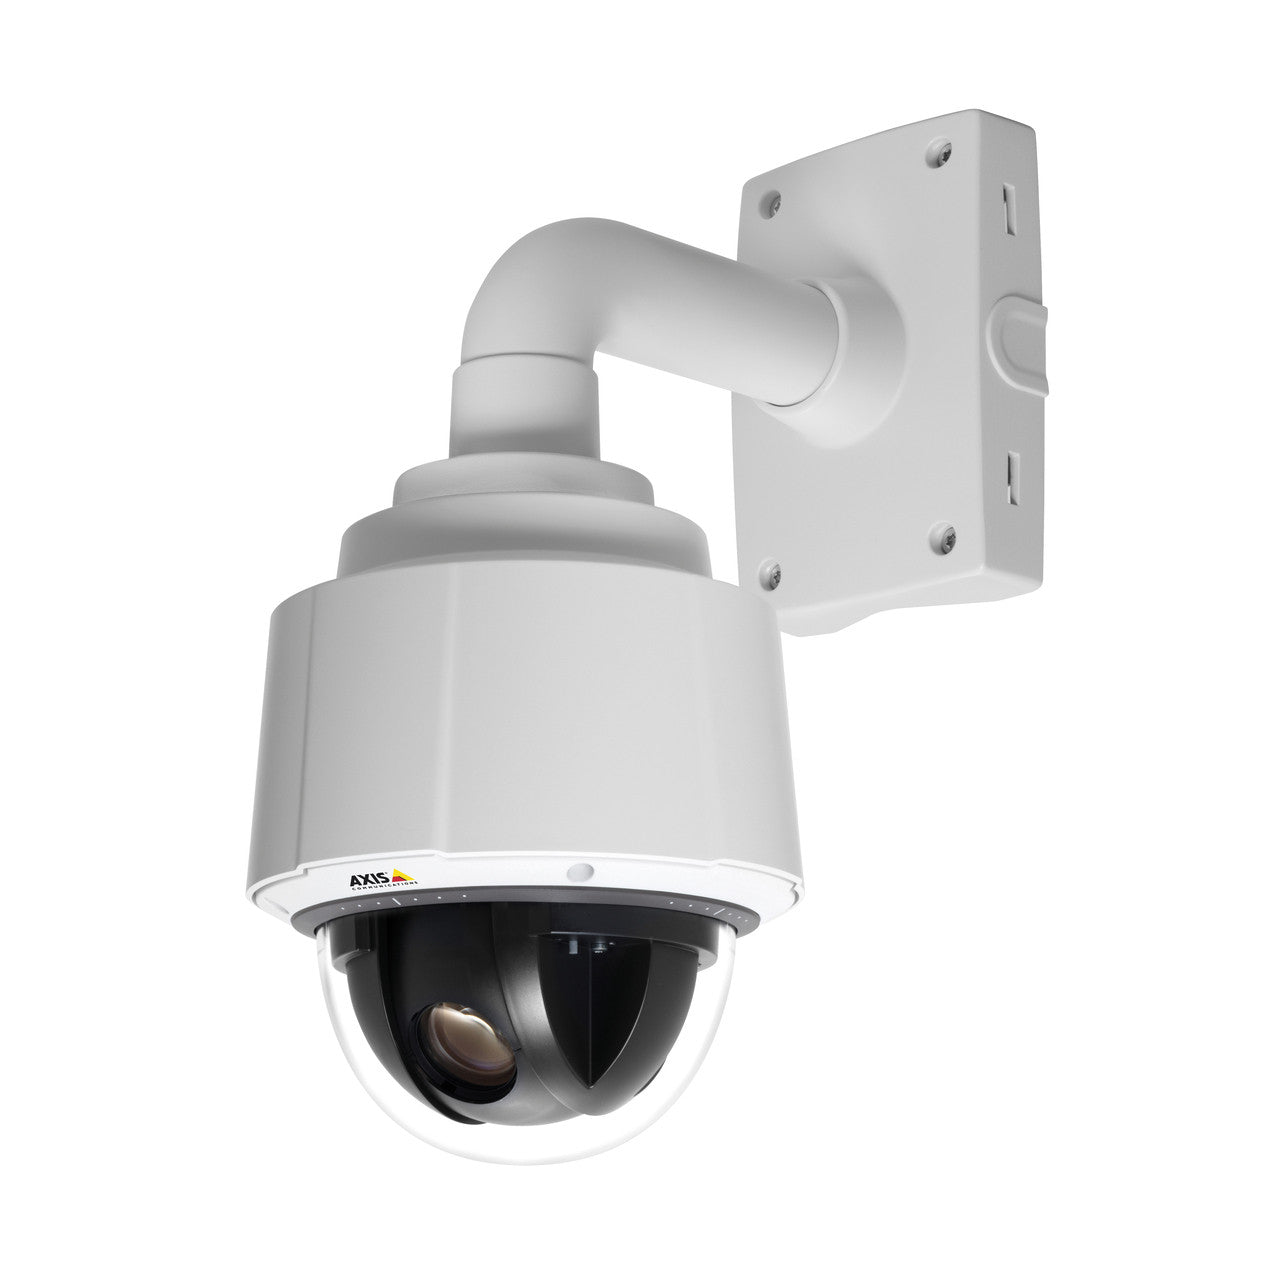 AXIS Q6044 with optional T91A61 Wall Bracket